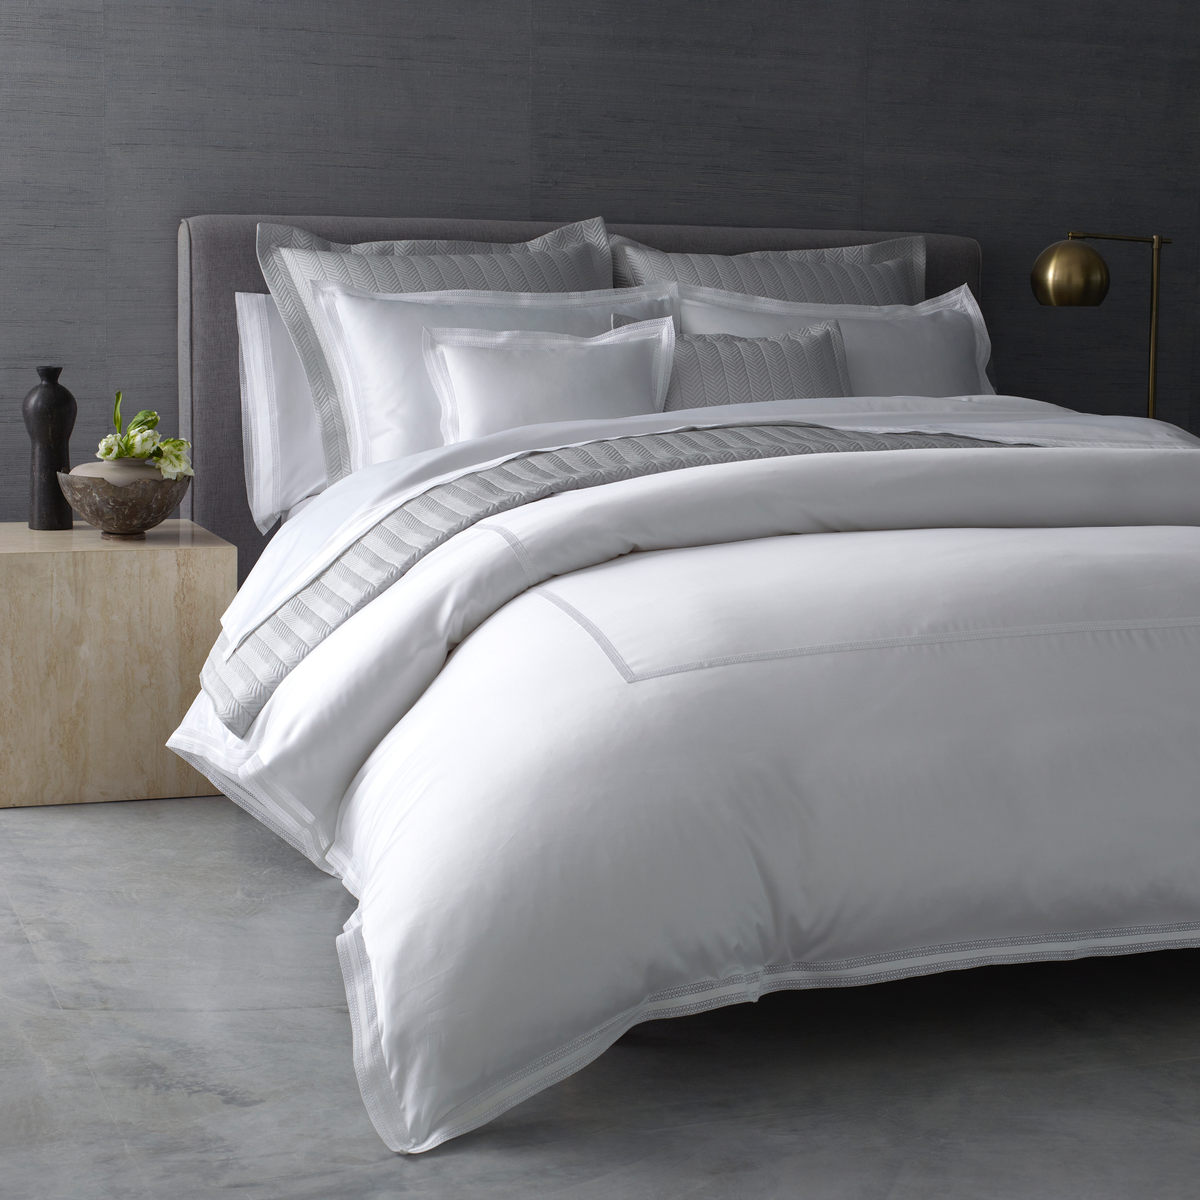 Full Bed Coordinated with Matouk Netto in Silver and Grace in White Color